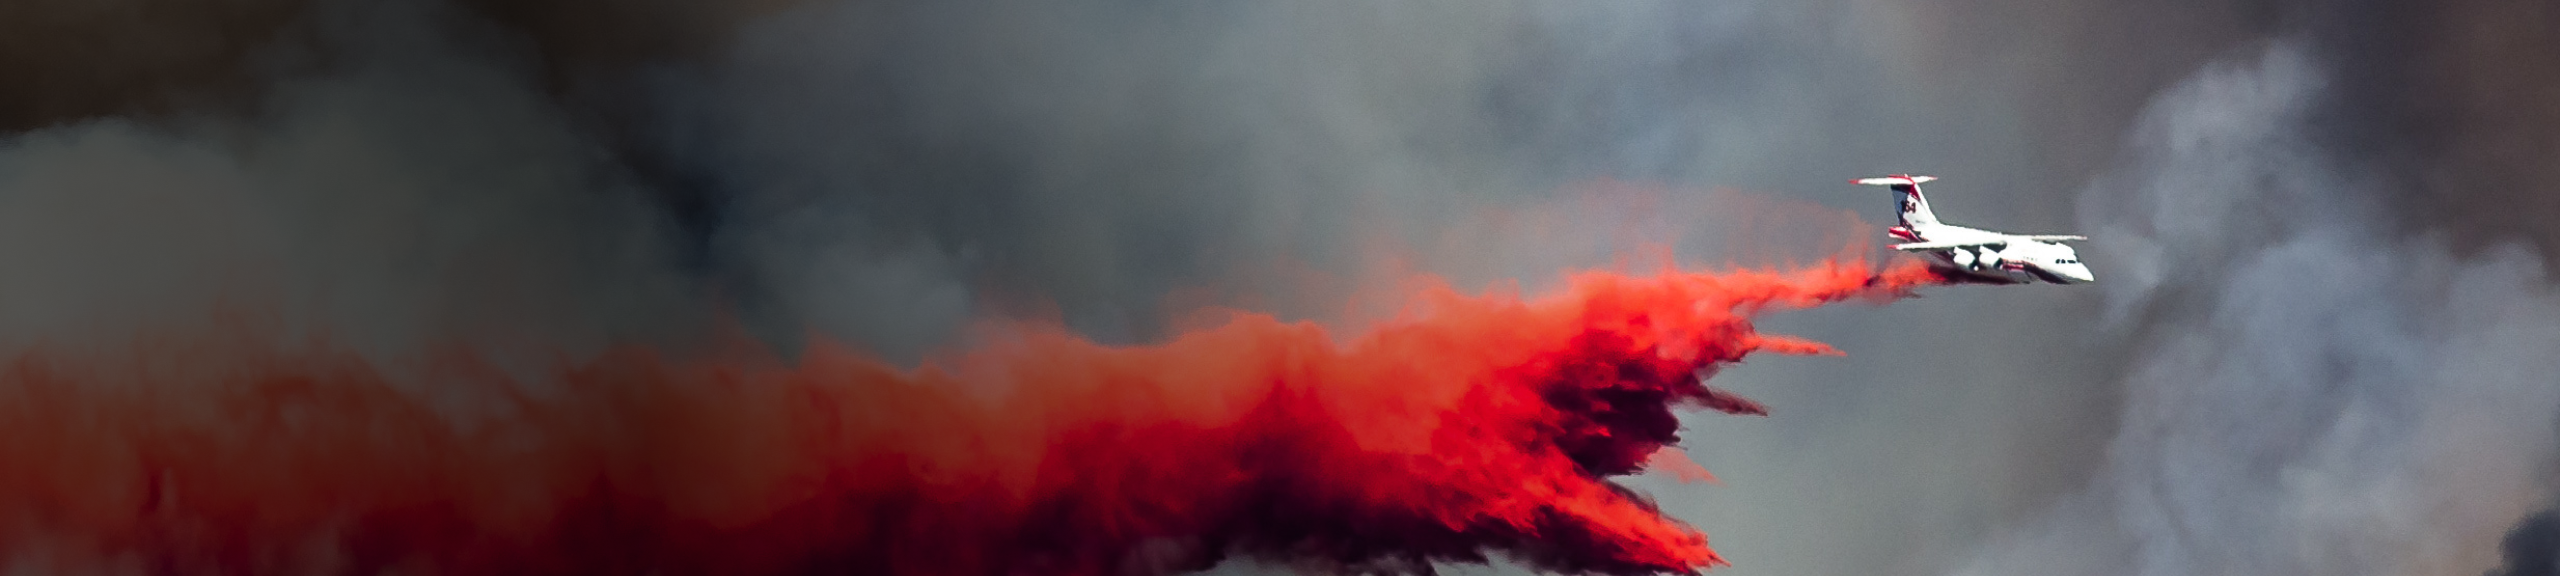 Aircraft Dropping Fire Retardant as it Battles the Raging Wildfire